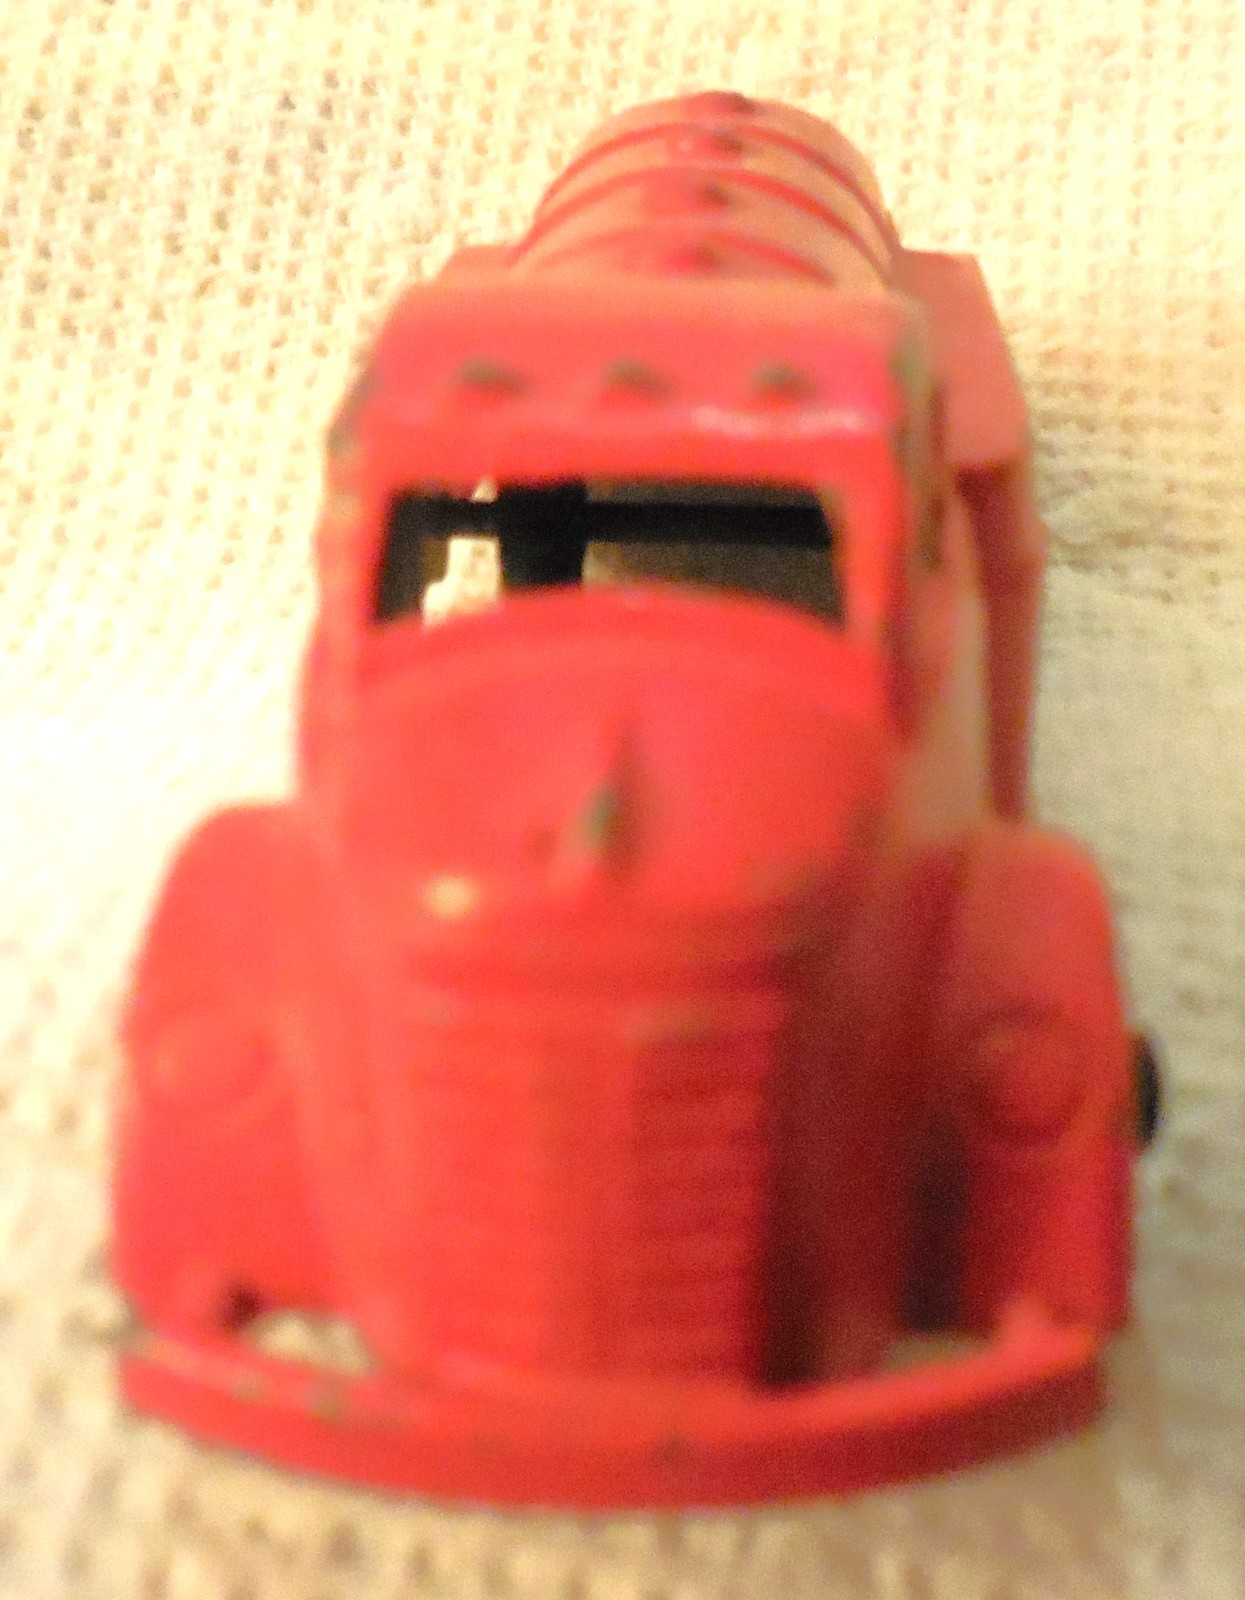 Tootsietoy Made In U.S.A Oil/Gas Tanker Truck Red Nice Old Truck 1940's - $7.00